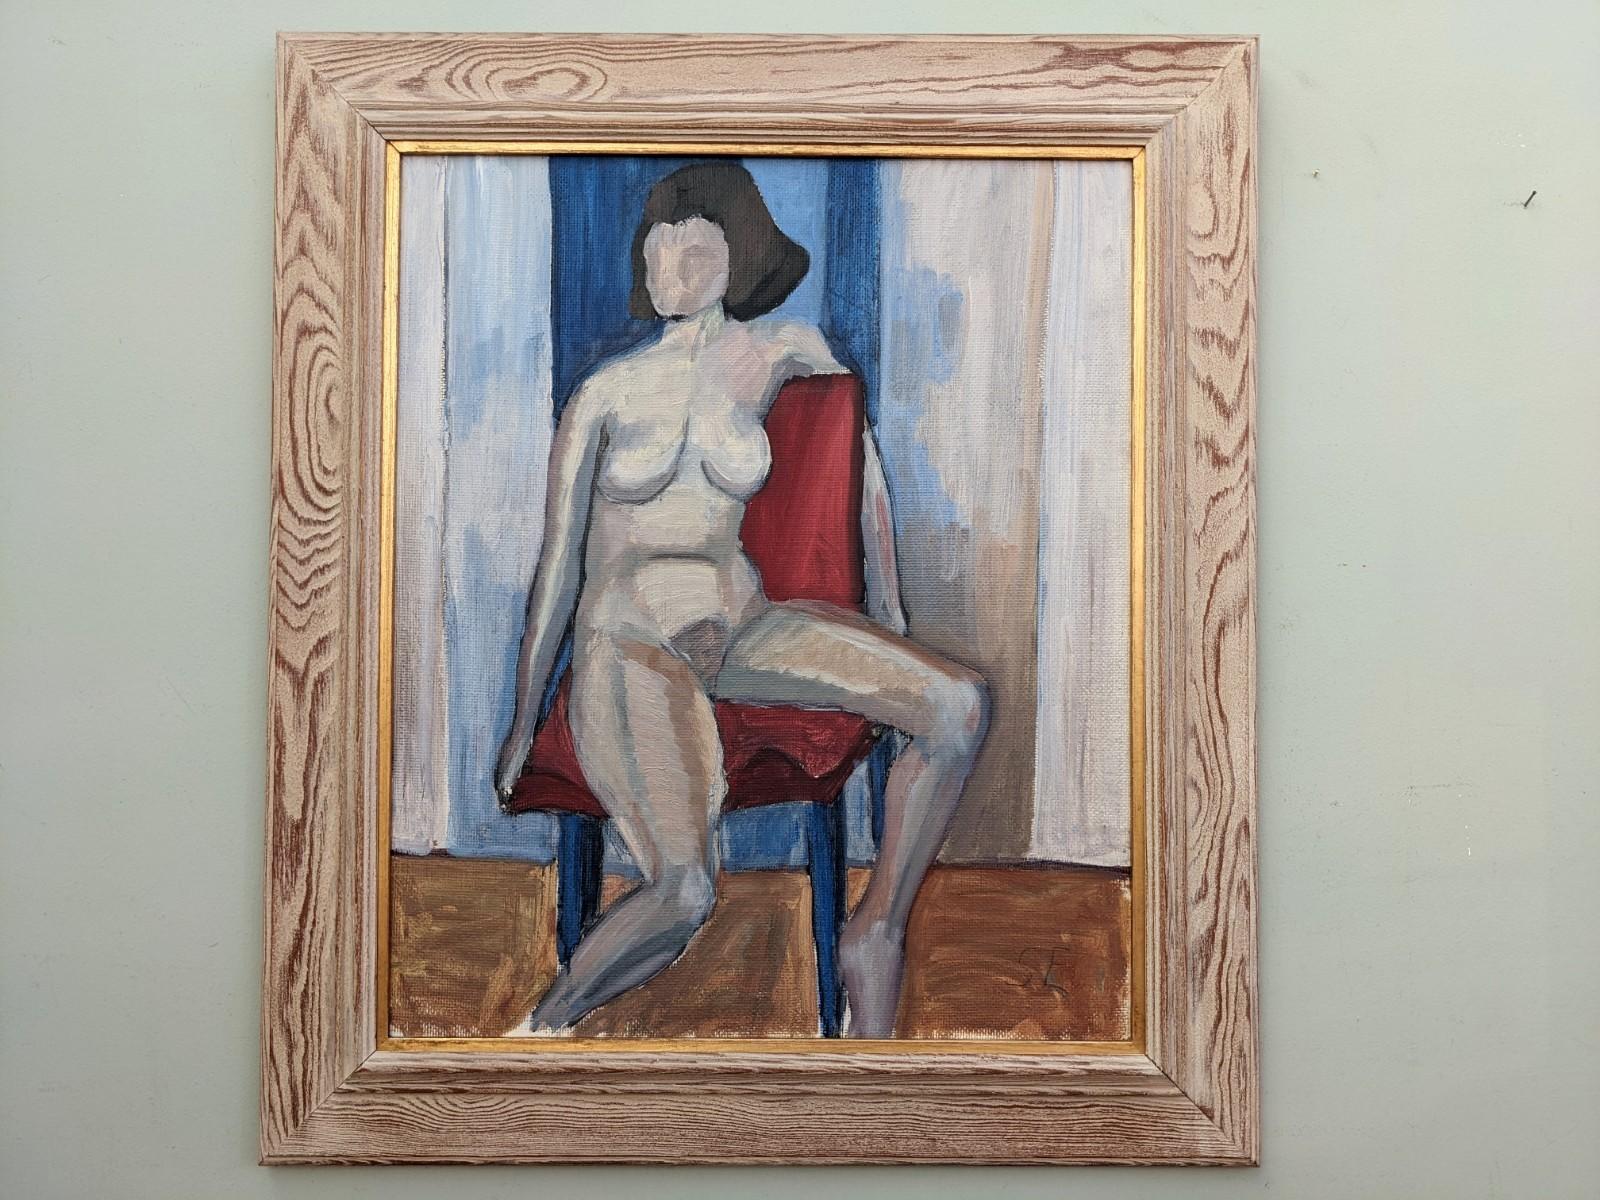 THE RED CHAIR
Oil on Board
Size: 71 x 62 cm (including frame)

A brilliantly executed mid century modernist nude composition, painted in oil onto board.

This nude figure study depicts a female figure seated on a chair, with one arm casually resting